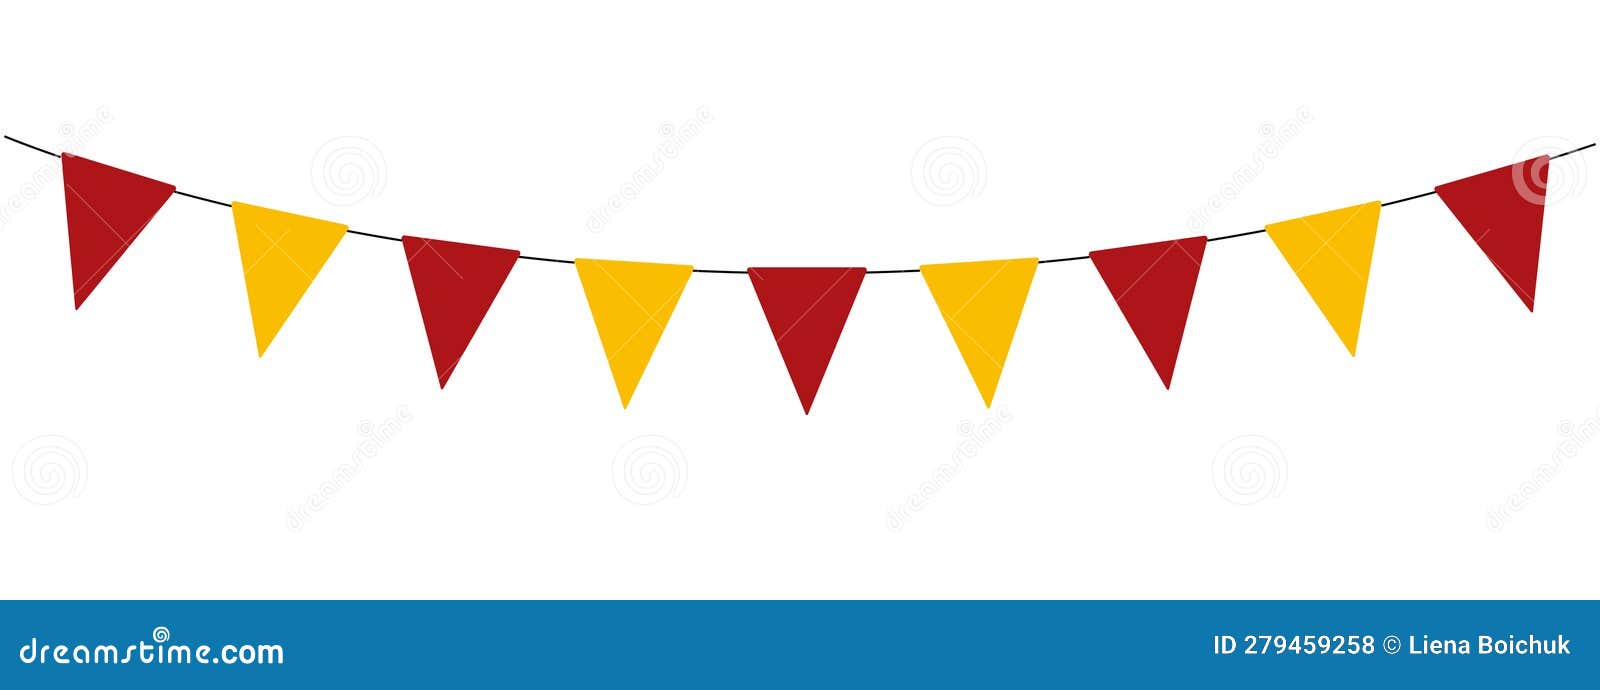 spanish national day, bunting garland, red and yellow, string of triangular flags, pennants, retro style 